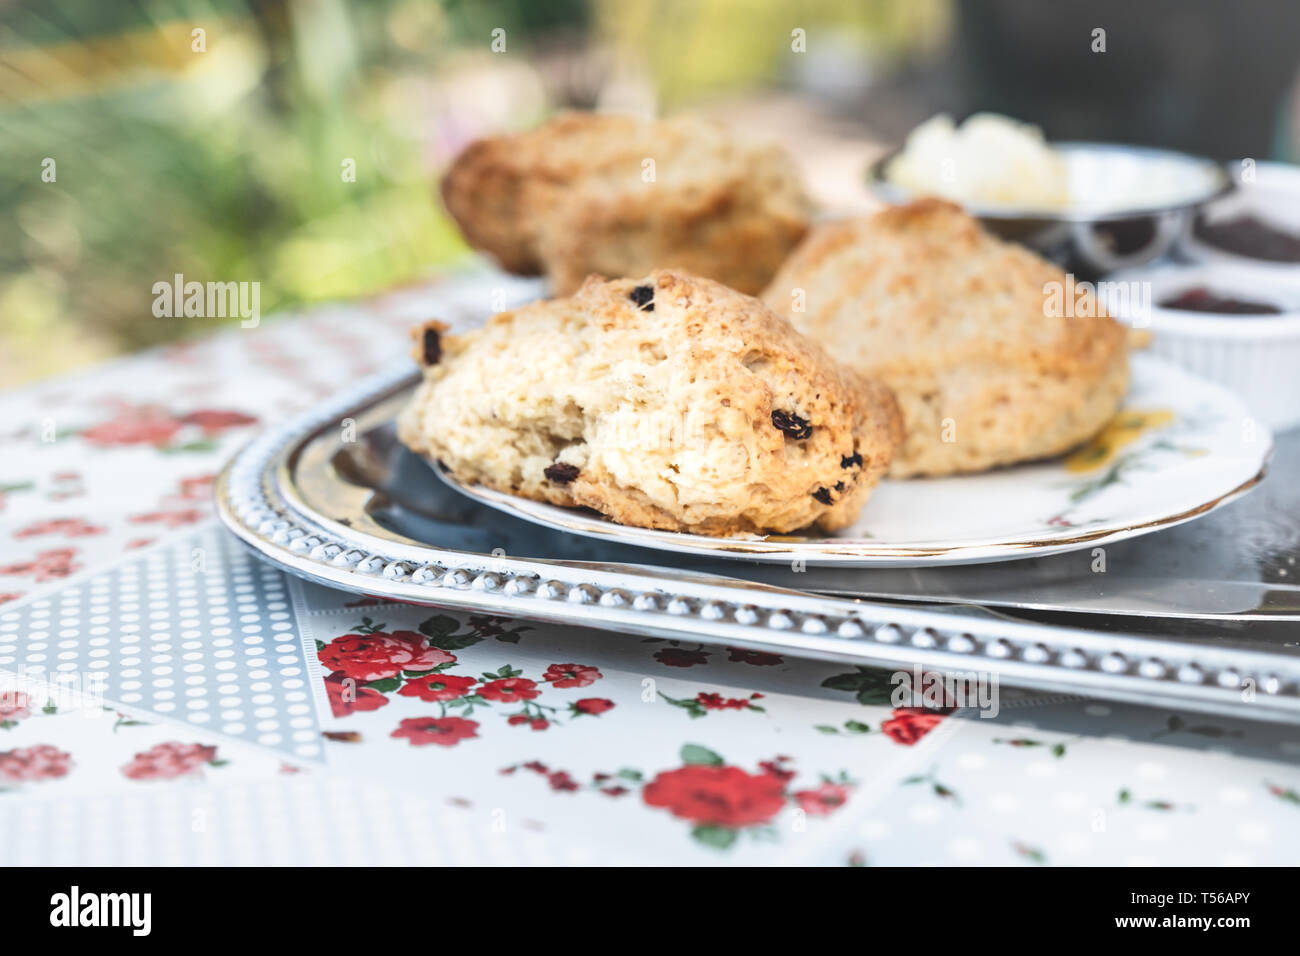 Scones with jam on for an English afternoon tea at a garden teashop. Stock Photo